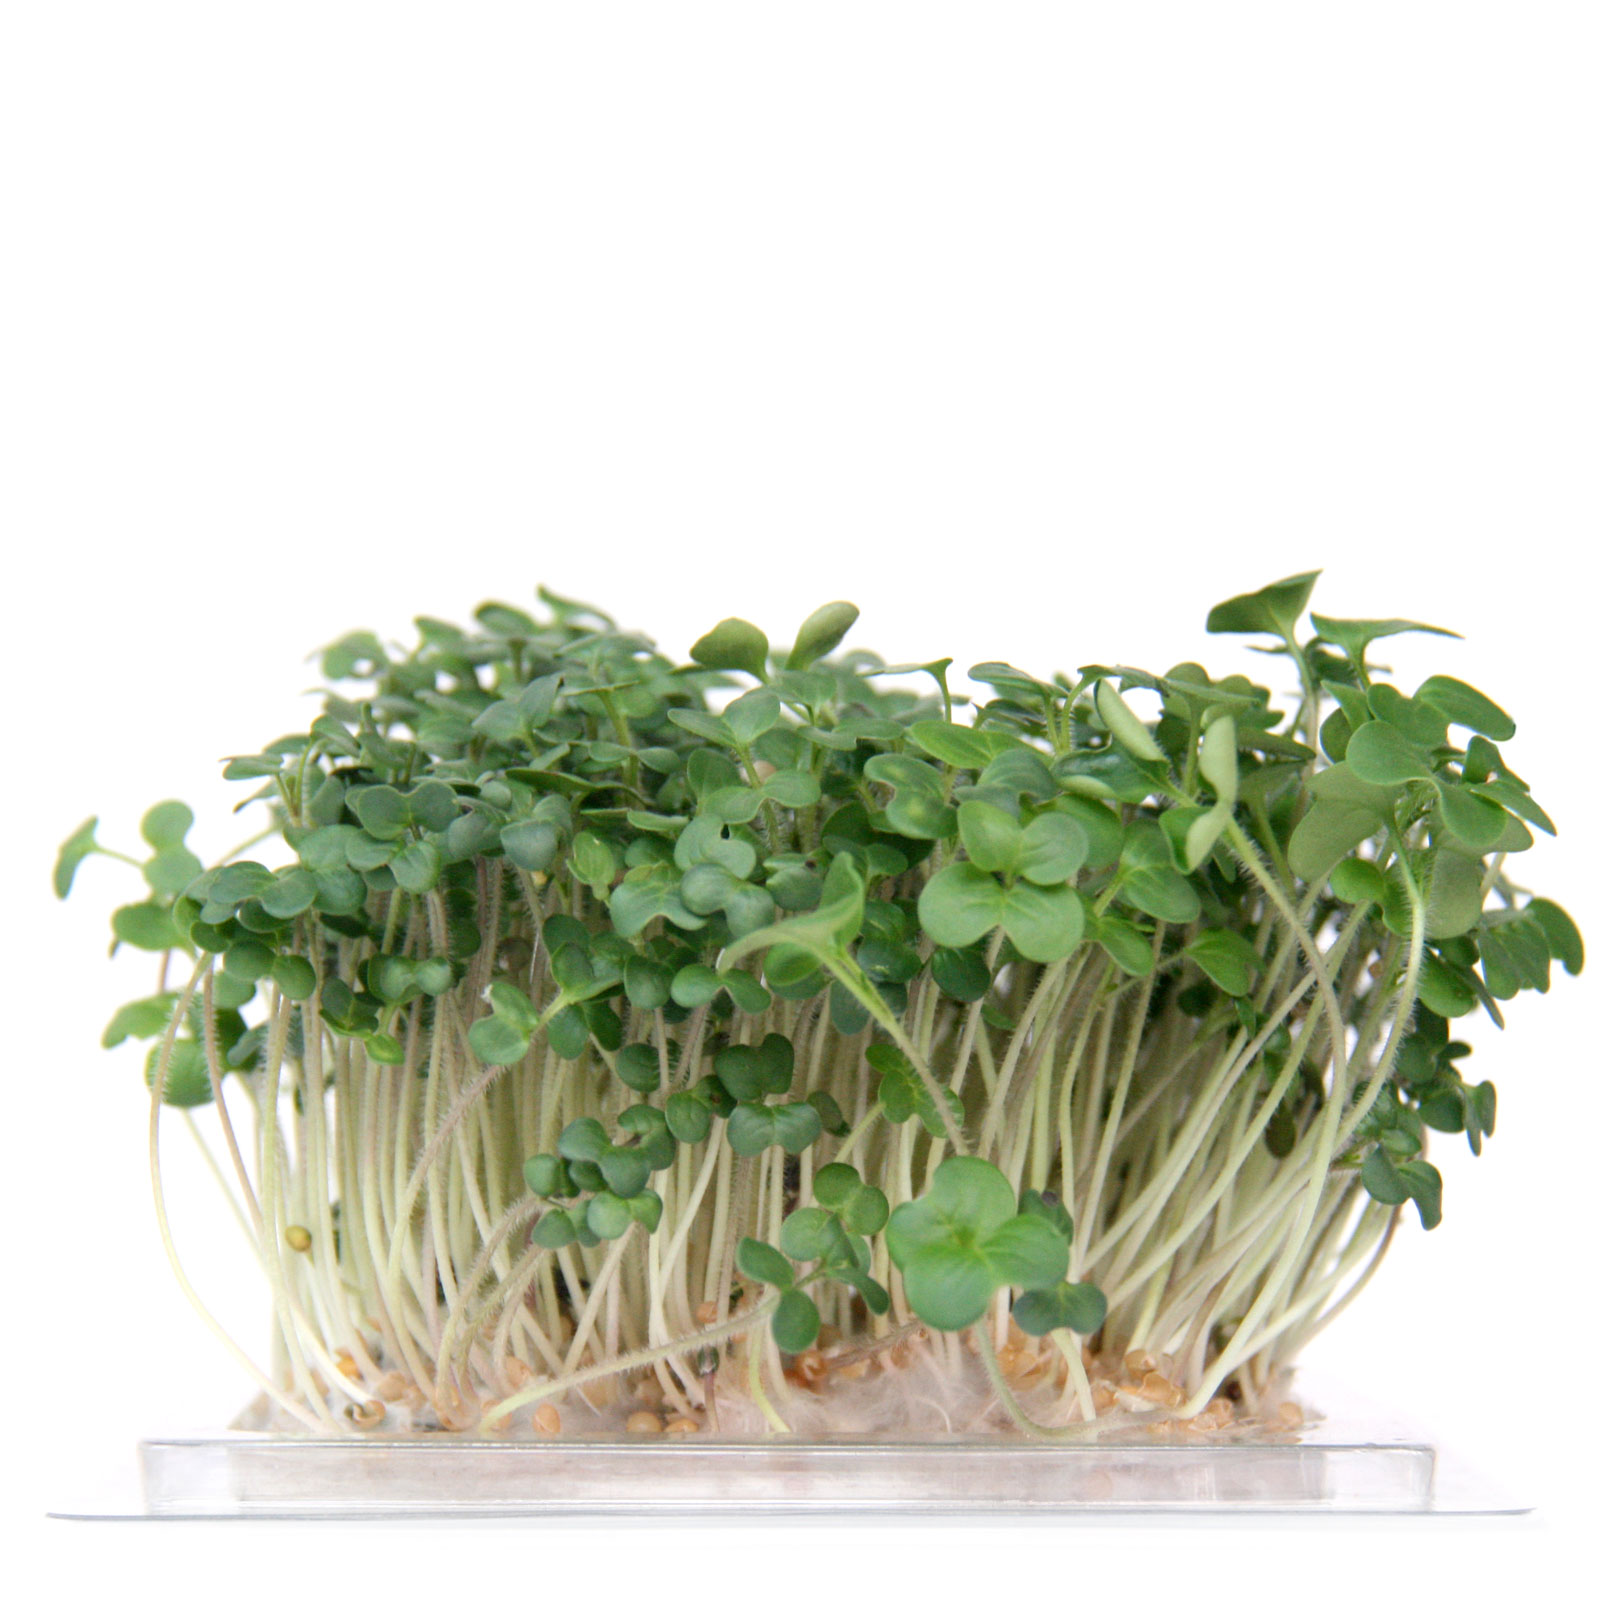 InstaGreen Microgreen cup with Mustard